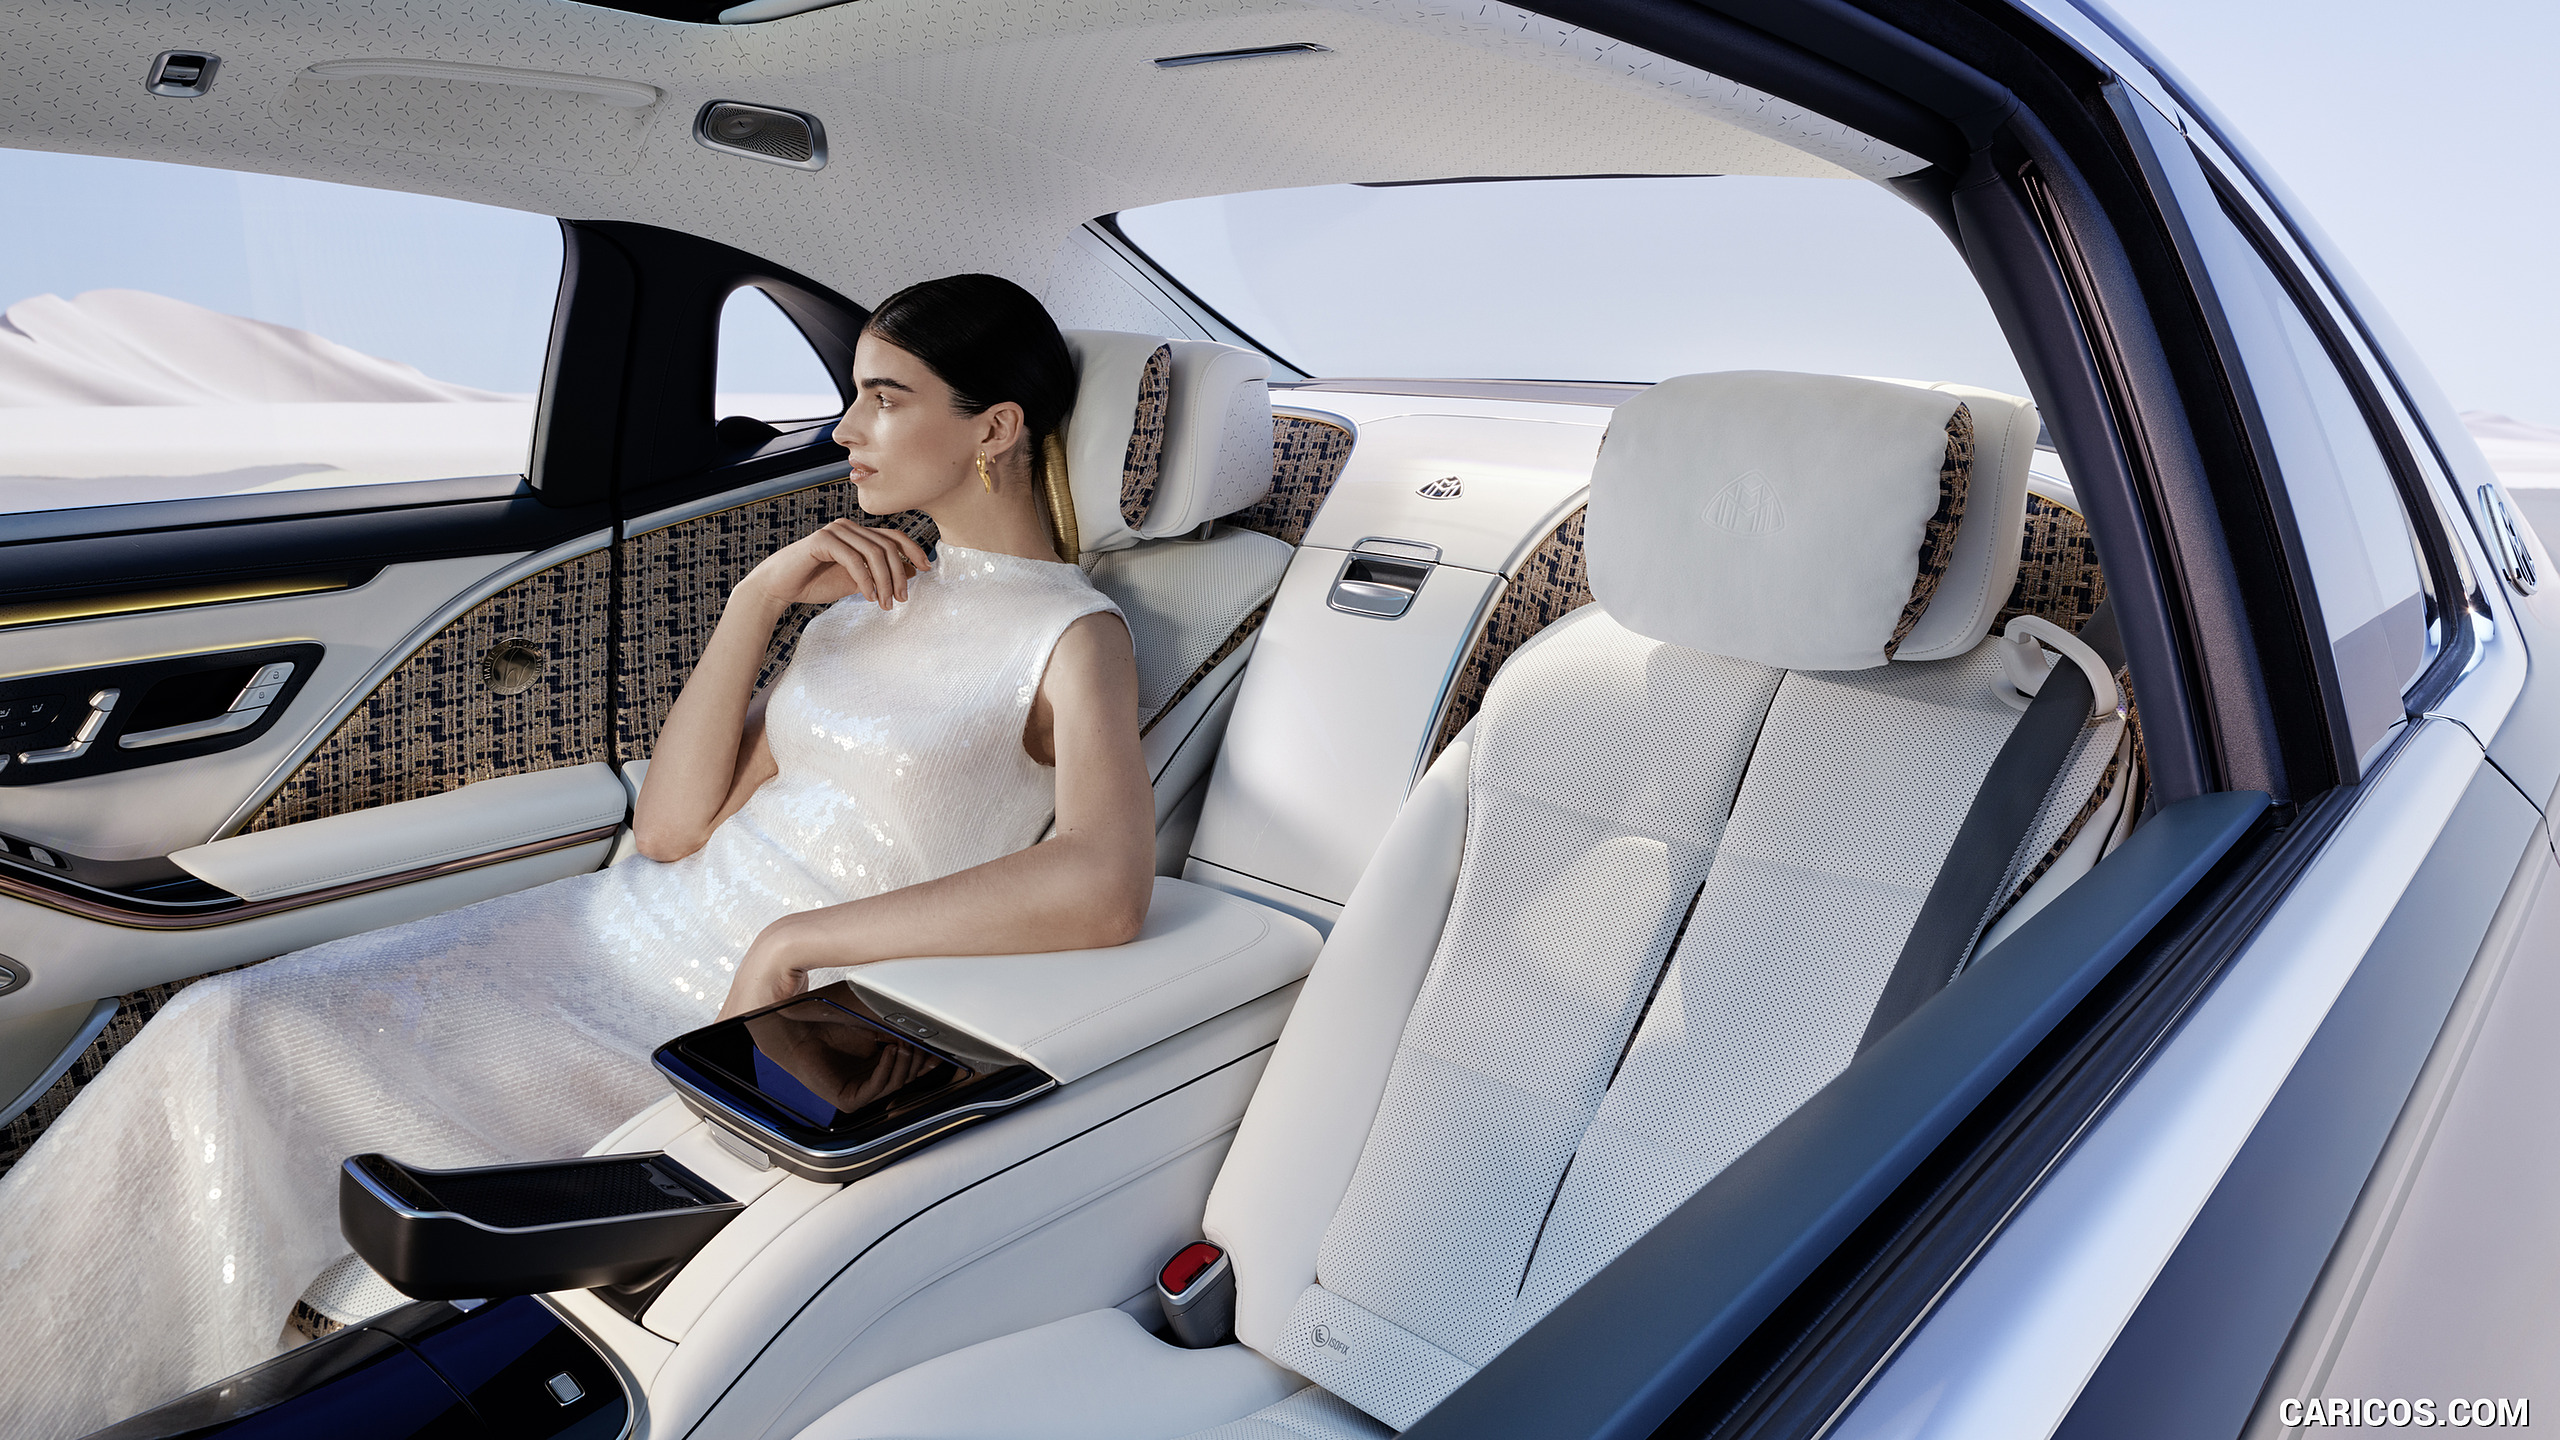 2023 Mercedes-Maybach S-Class Haute Voiture - Interior, Rear Seats, #20 of 29